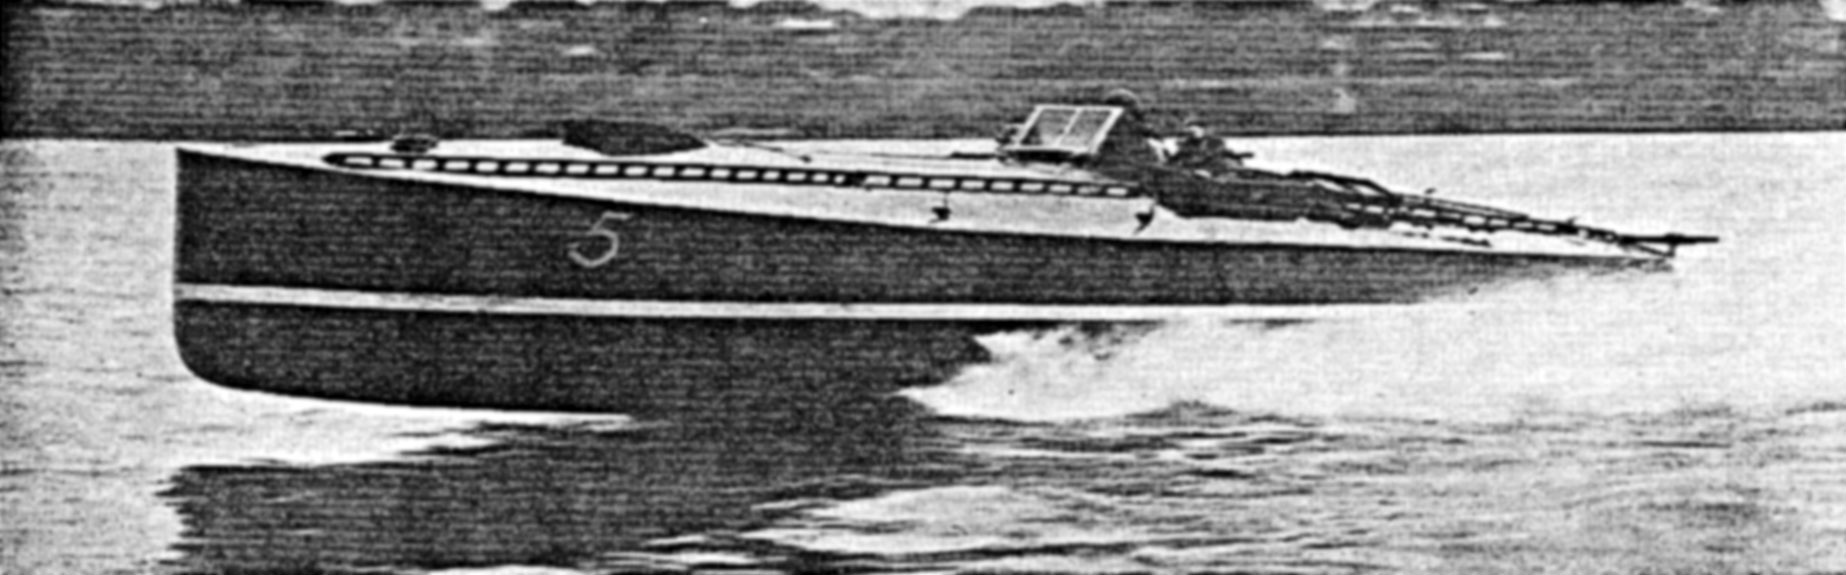 Rainbow II, designed by George F. Crouch, and powered with two GR Sterlings